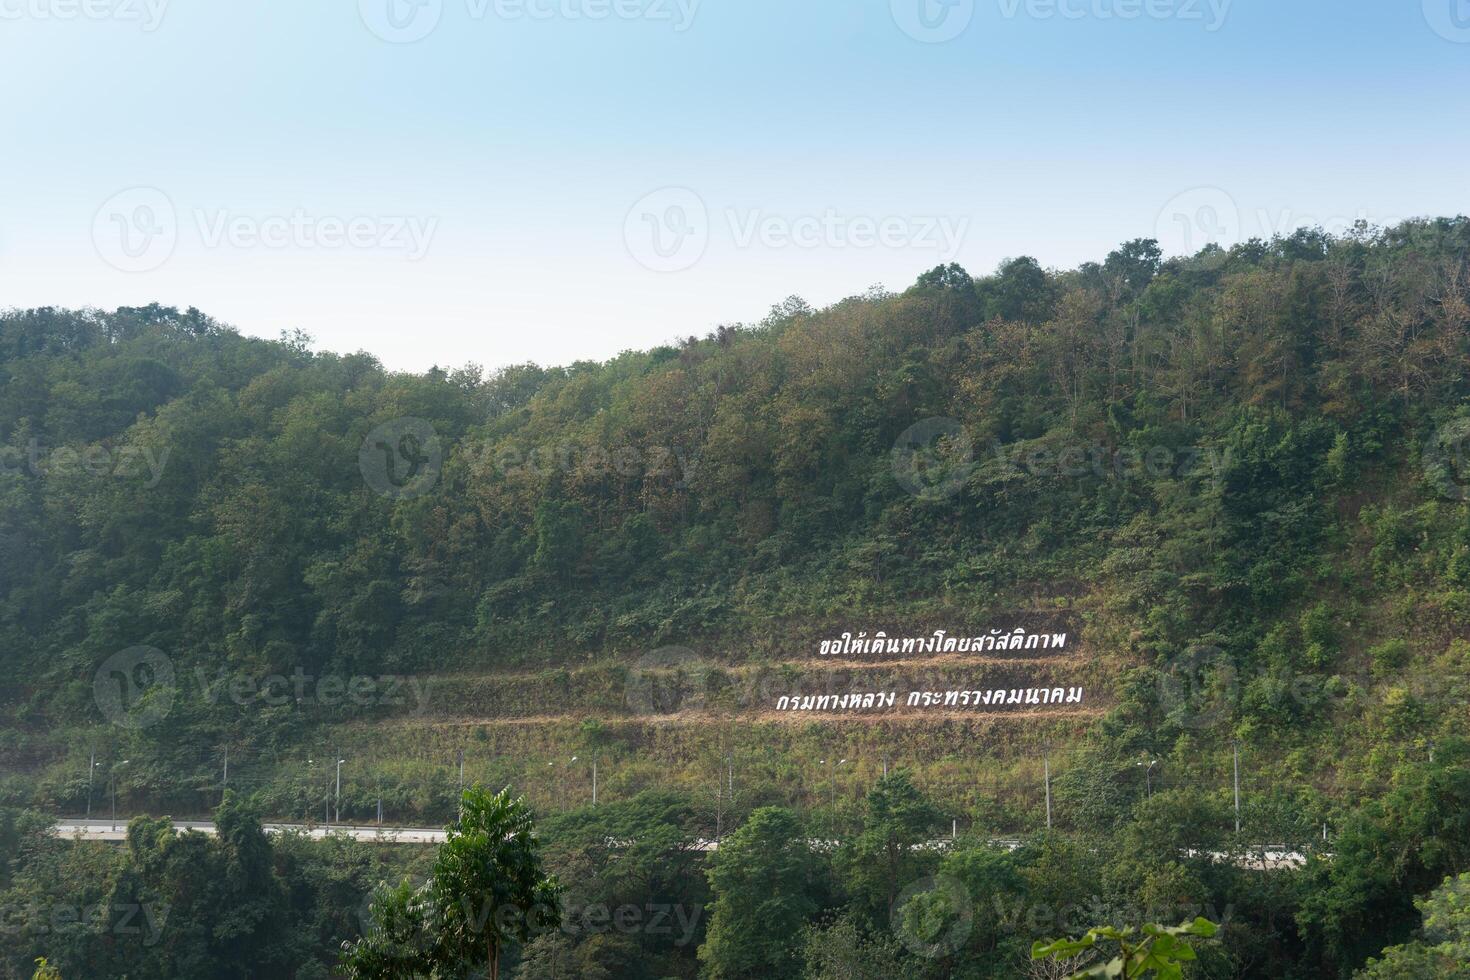 Landscape view of mountain at Khao Plung Rest Stop Uttaradit Thailand. Road cuts through the mountains. And the Thai text means welcome. under blue sky. photo